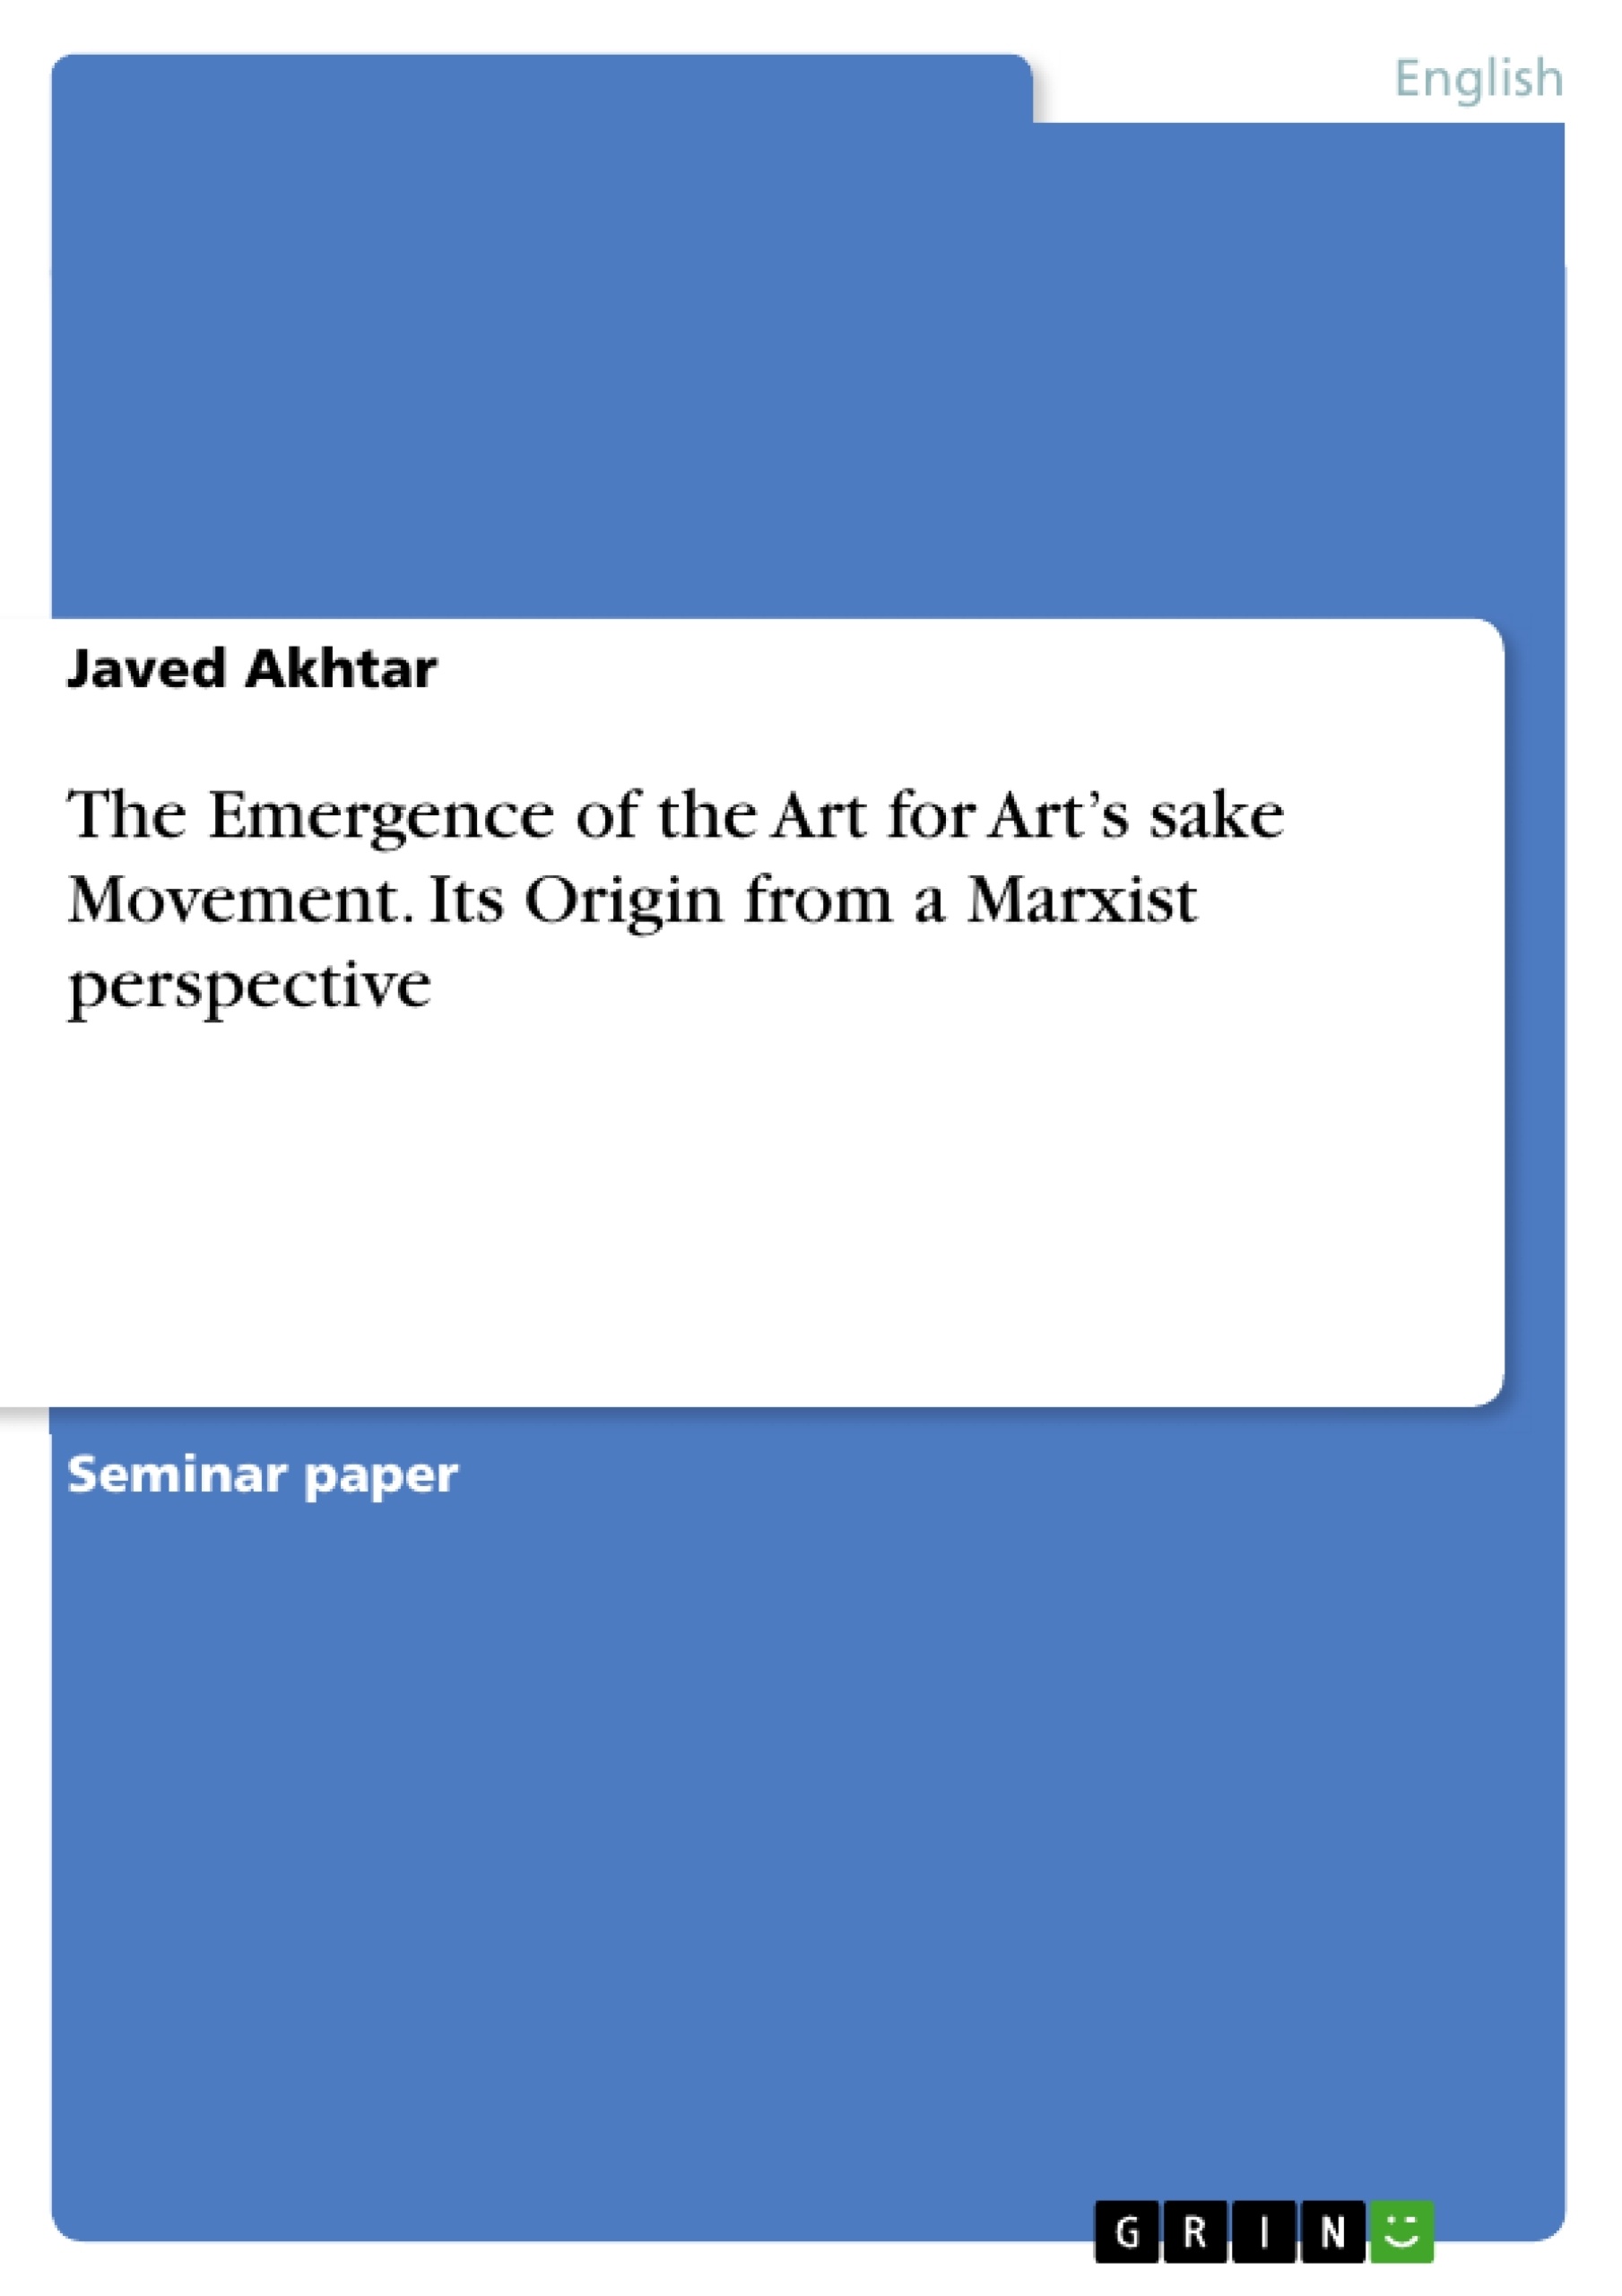 Titel: The Emergence of the Art for Art’s sake Movement. Its Origin from a Marxist perspective